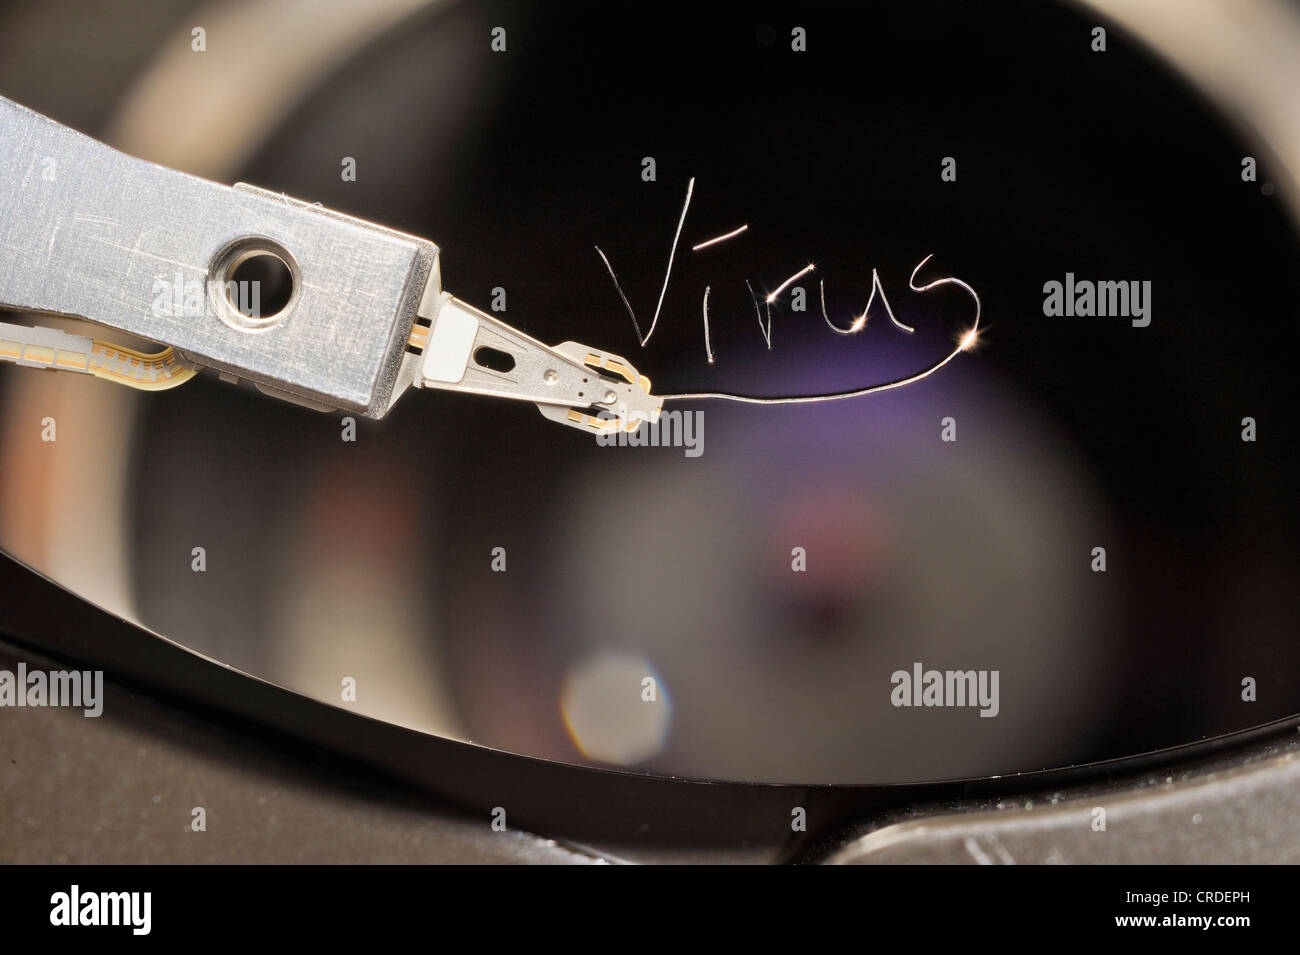 Actuator arm and head of a computer hard drive, with the engraved word "virus" Stock Photo